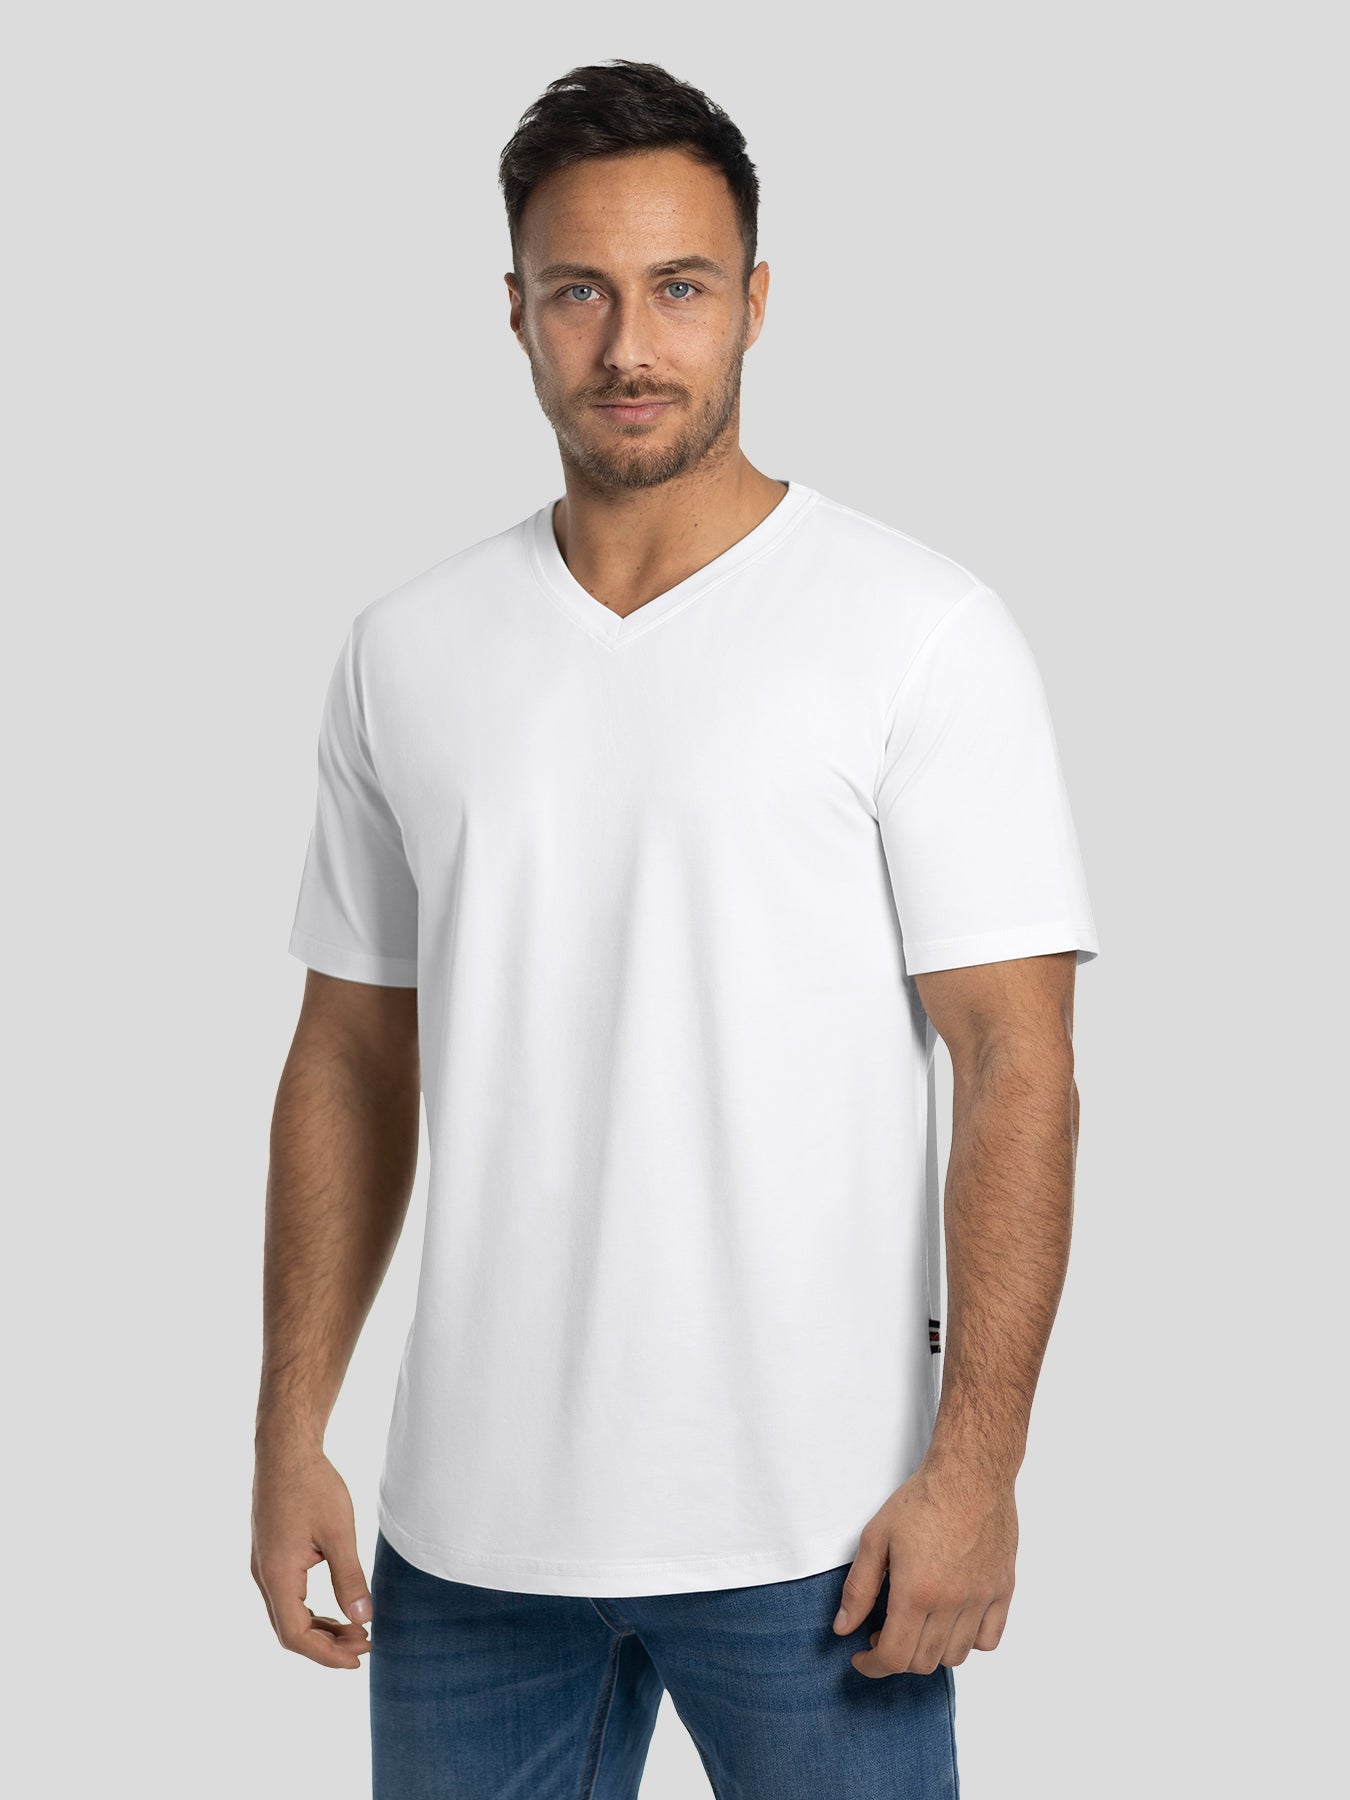 StayCool 2.0 V-neck Classic Fit 3-Pack